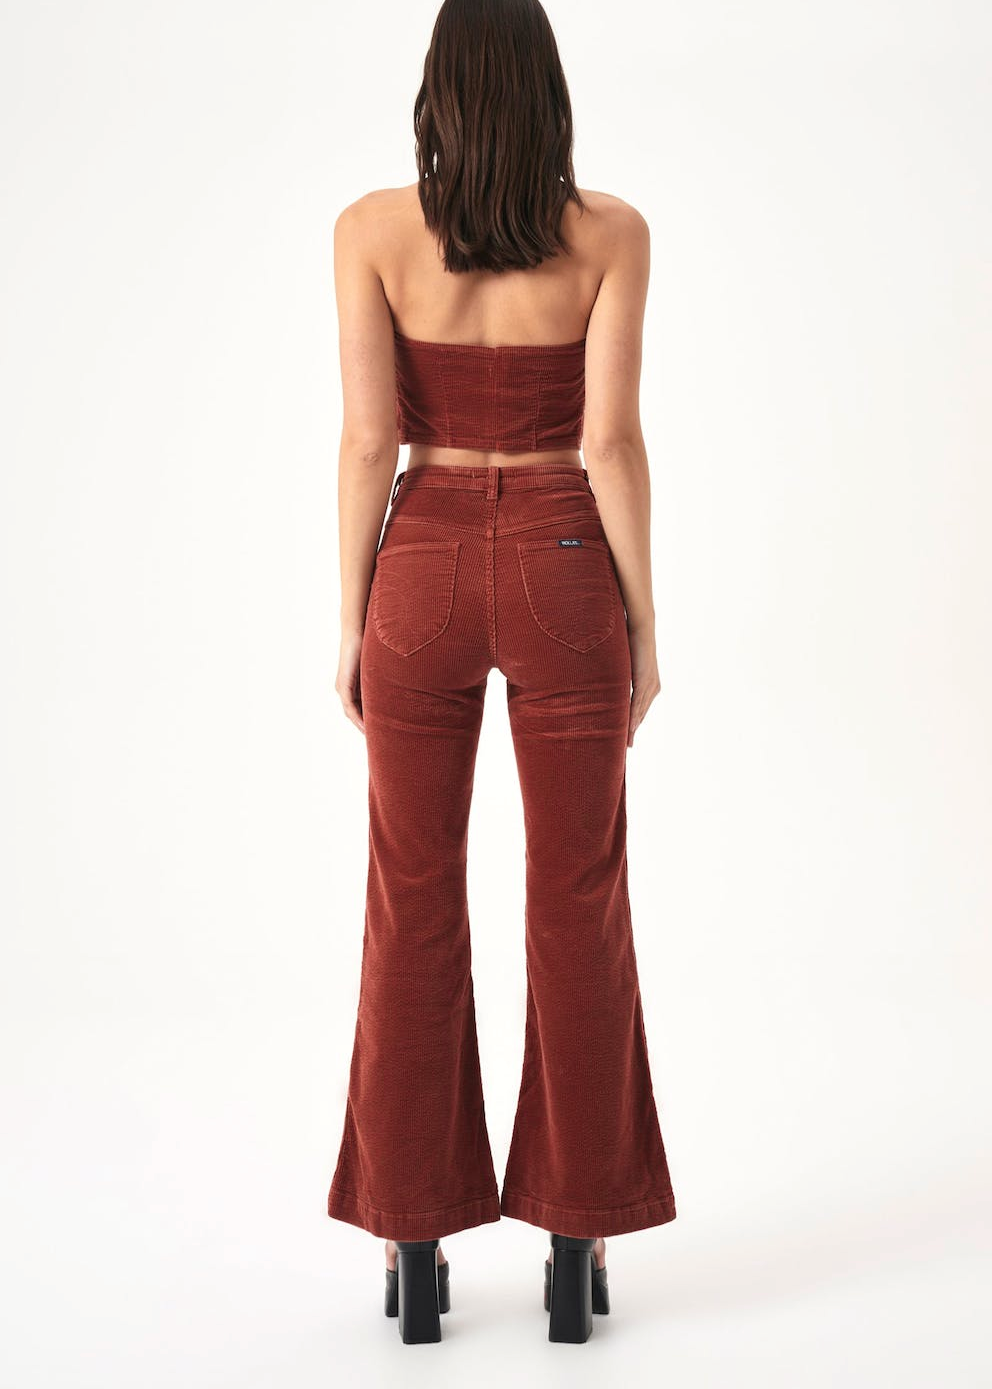 70s inspired Brick Red Stretch Corduroy Eastcoast Flares with high rise waist and patch front pockets by Rolla's Jeans